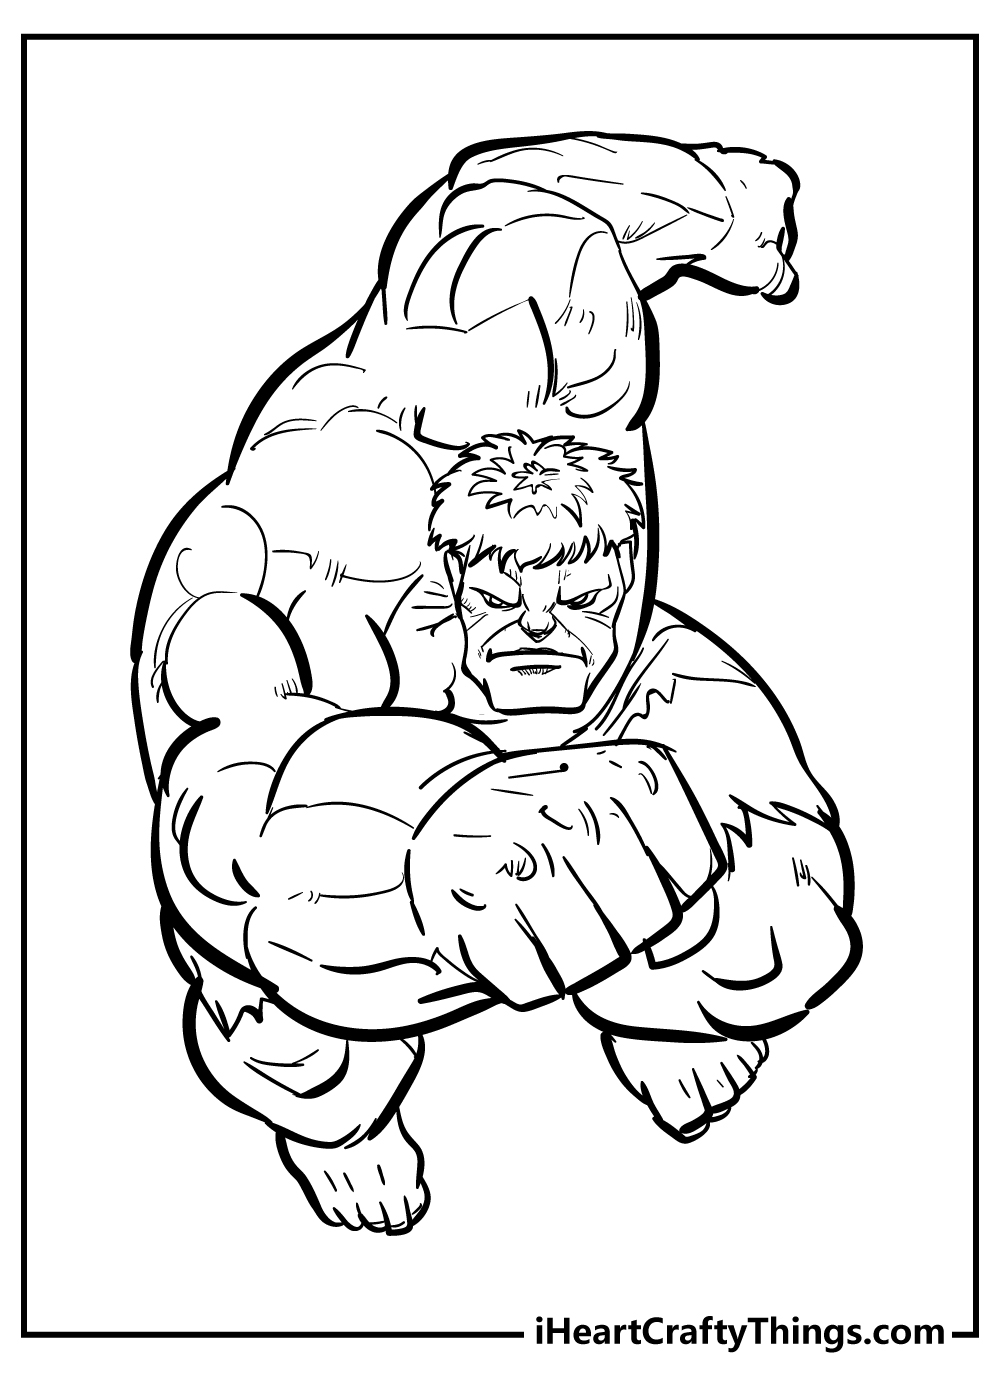 hulk marvel coloring pages